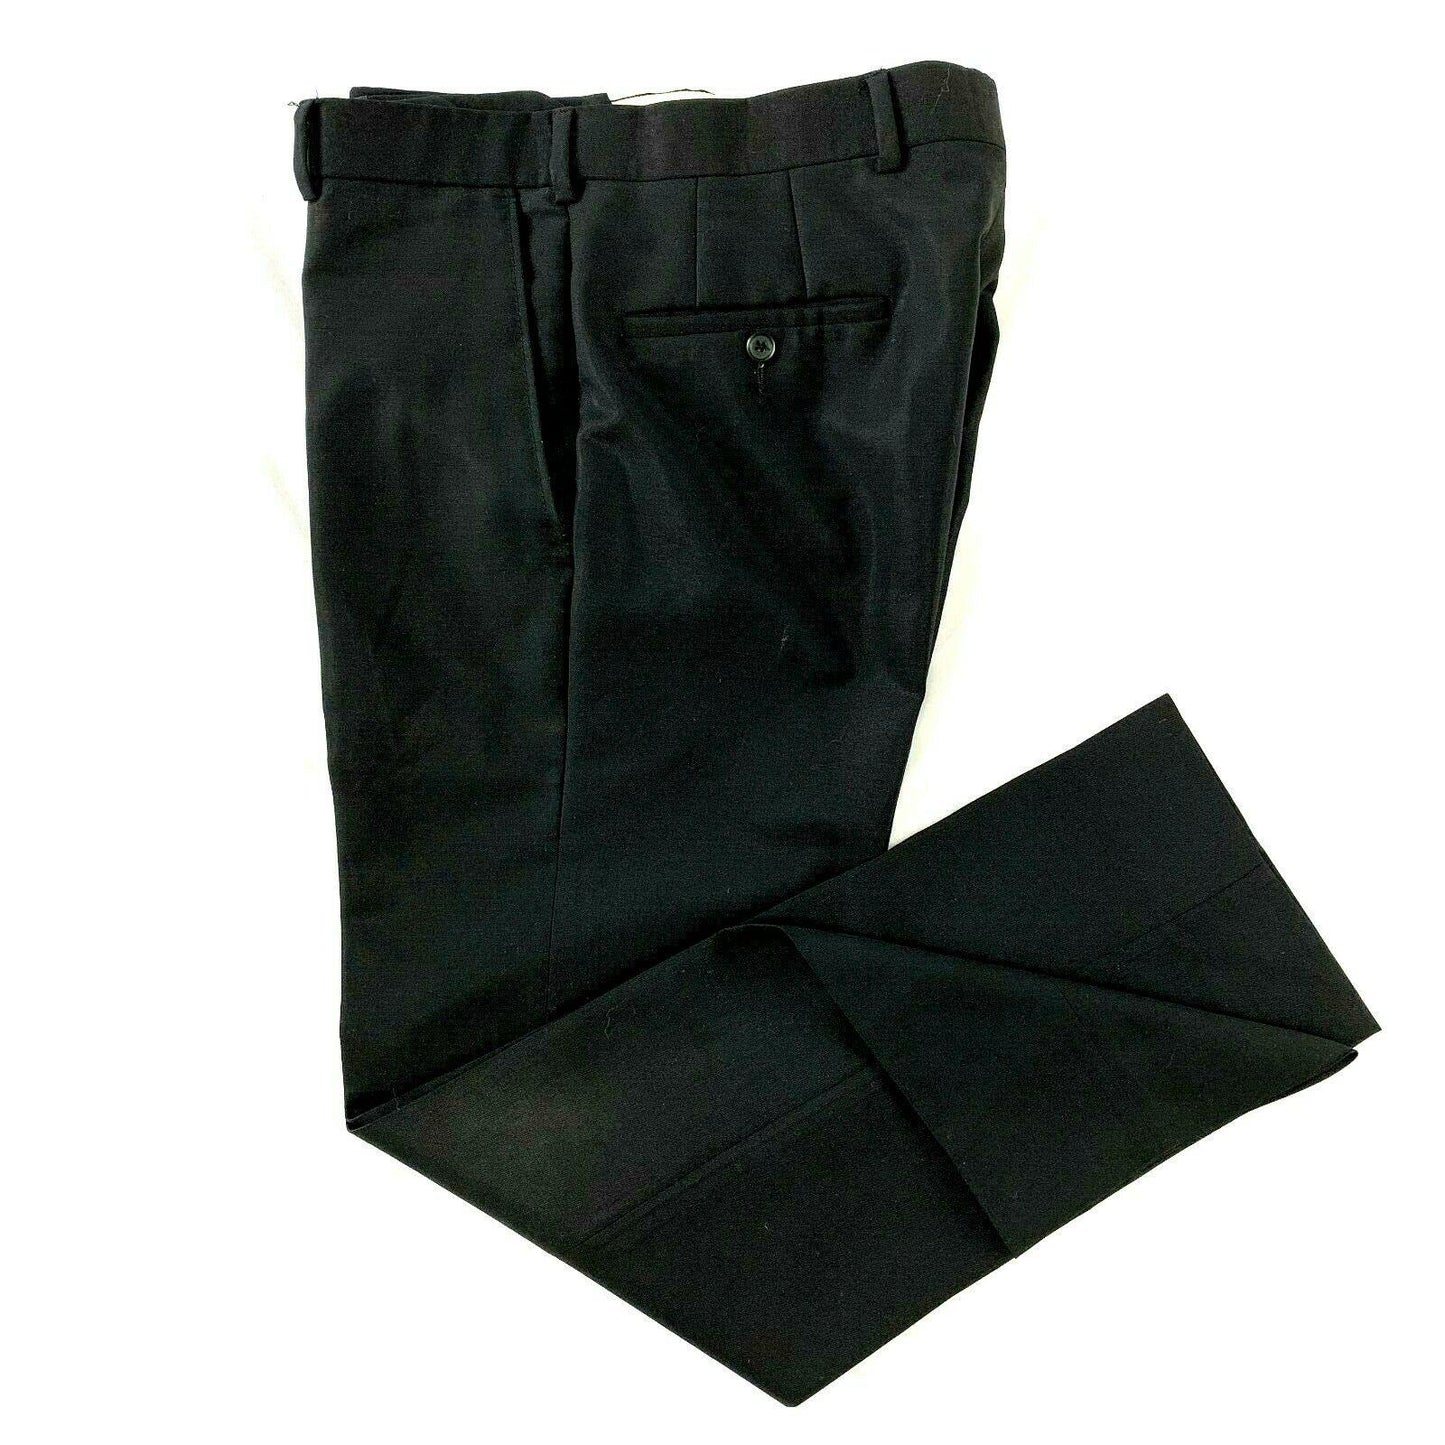 Coppley Black Flat Front Dress Pants Wool Mohair 32 Waist 30 Length Slim Fit - Genuine Design Luxury Consignment